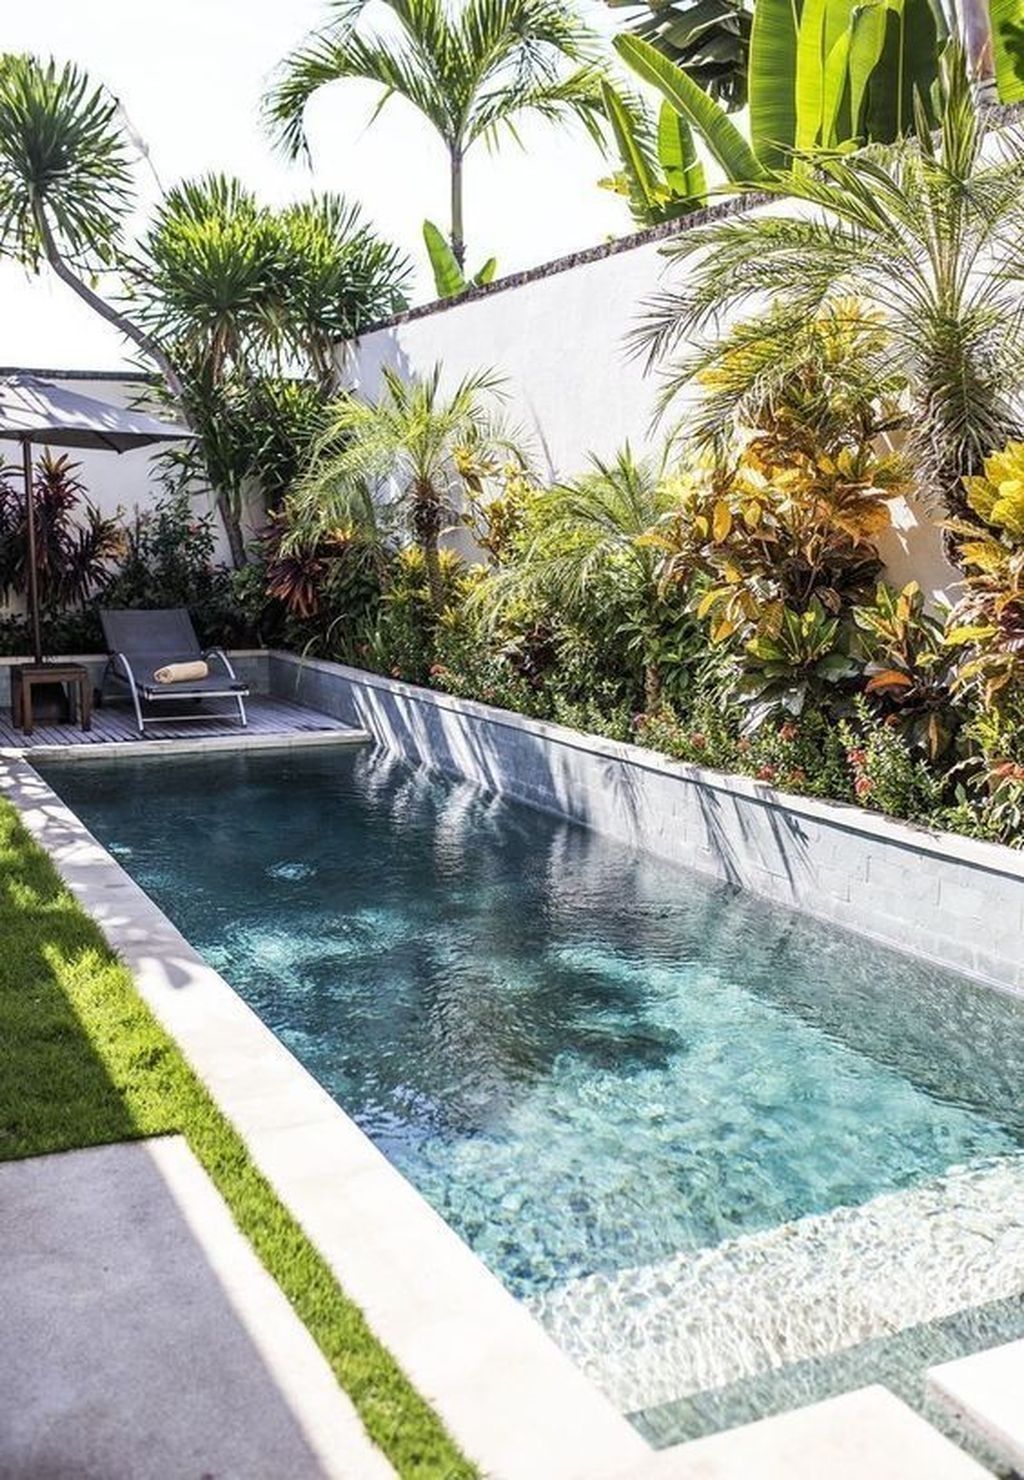 Garten Pool Ideen Neu Pin by Addicting Spice On Landscaping In 2020